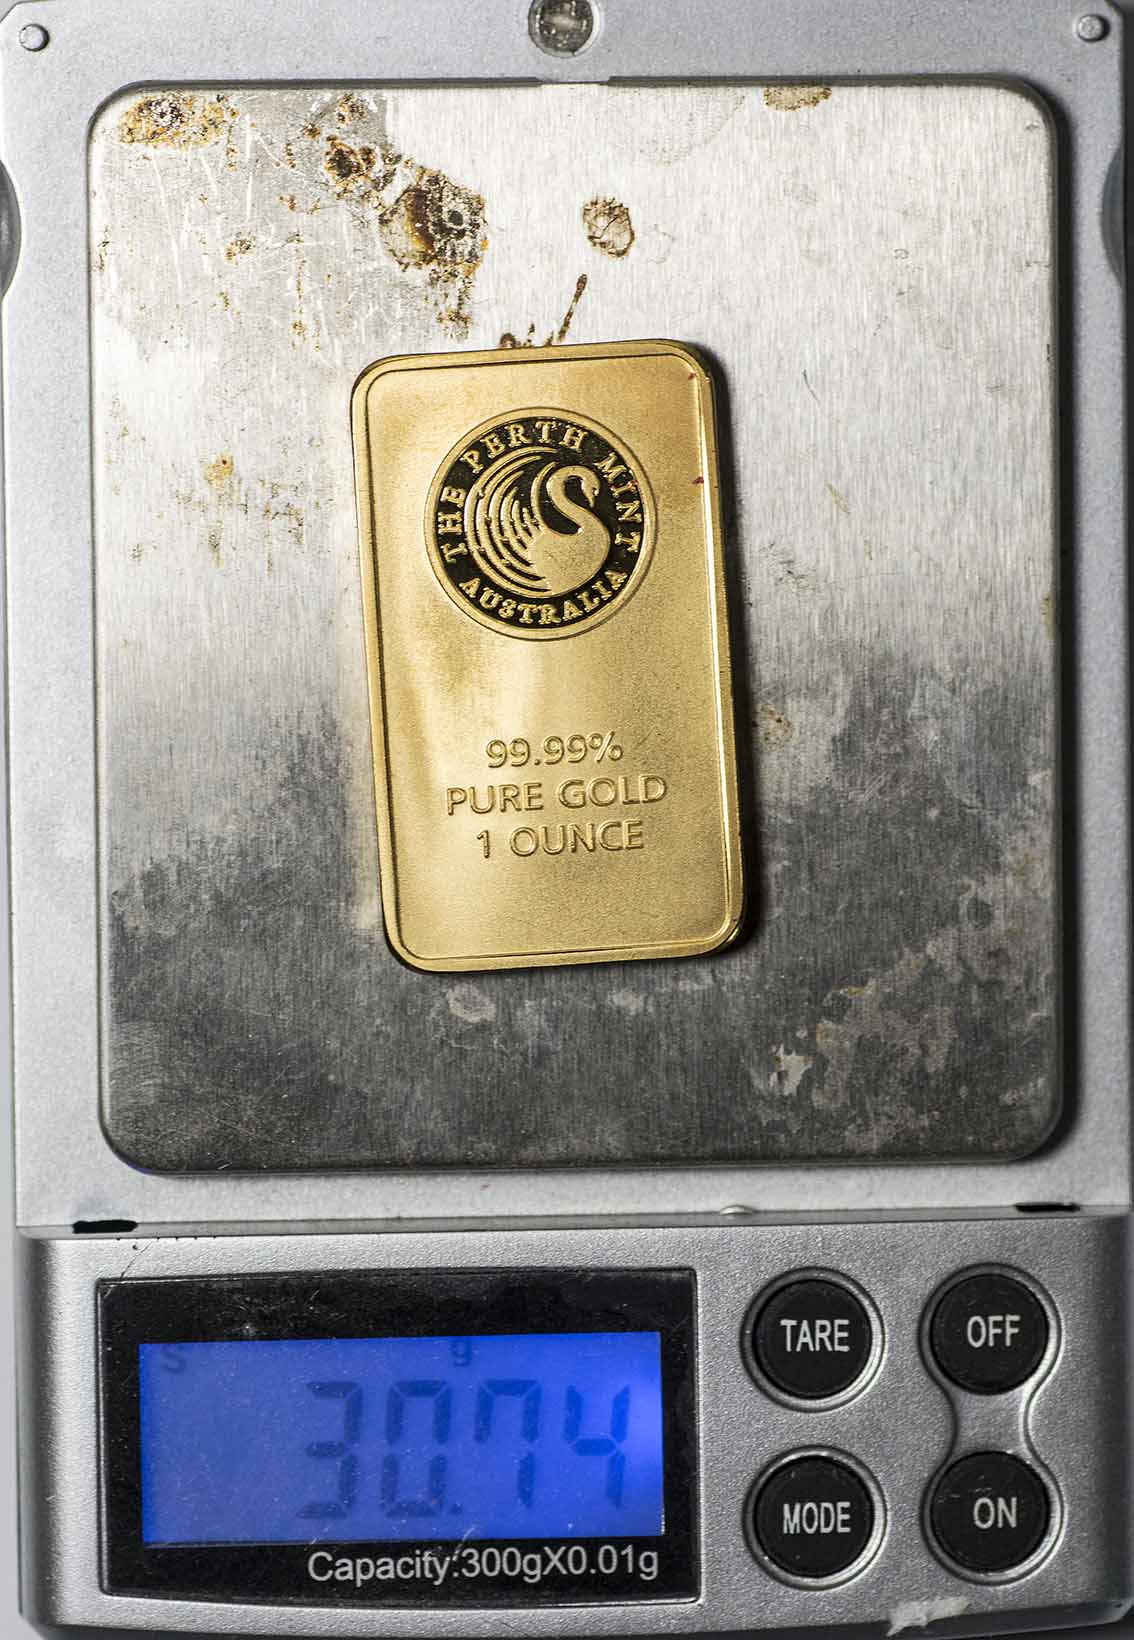 If you take the 1 oz Perth Mint gold bar out of the assay card and weigh it you'll find it's under weight. It weighs 30.74 grams while a genuine bar weighs 31.104 grams. 